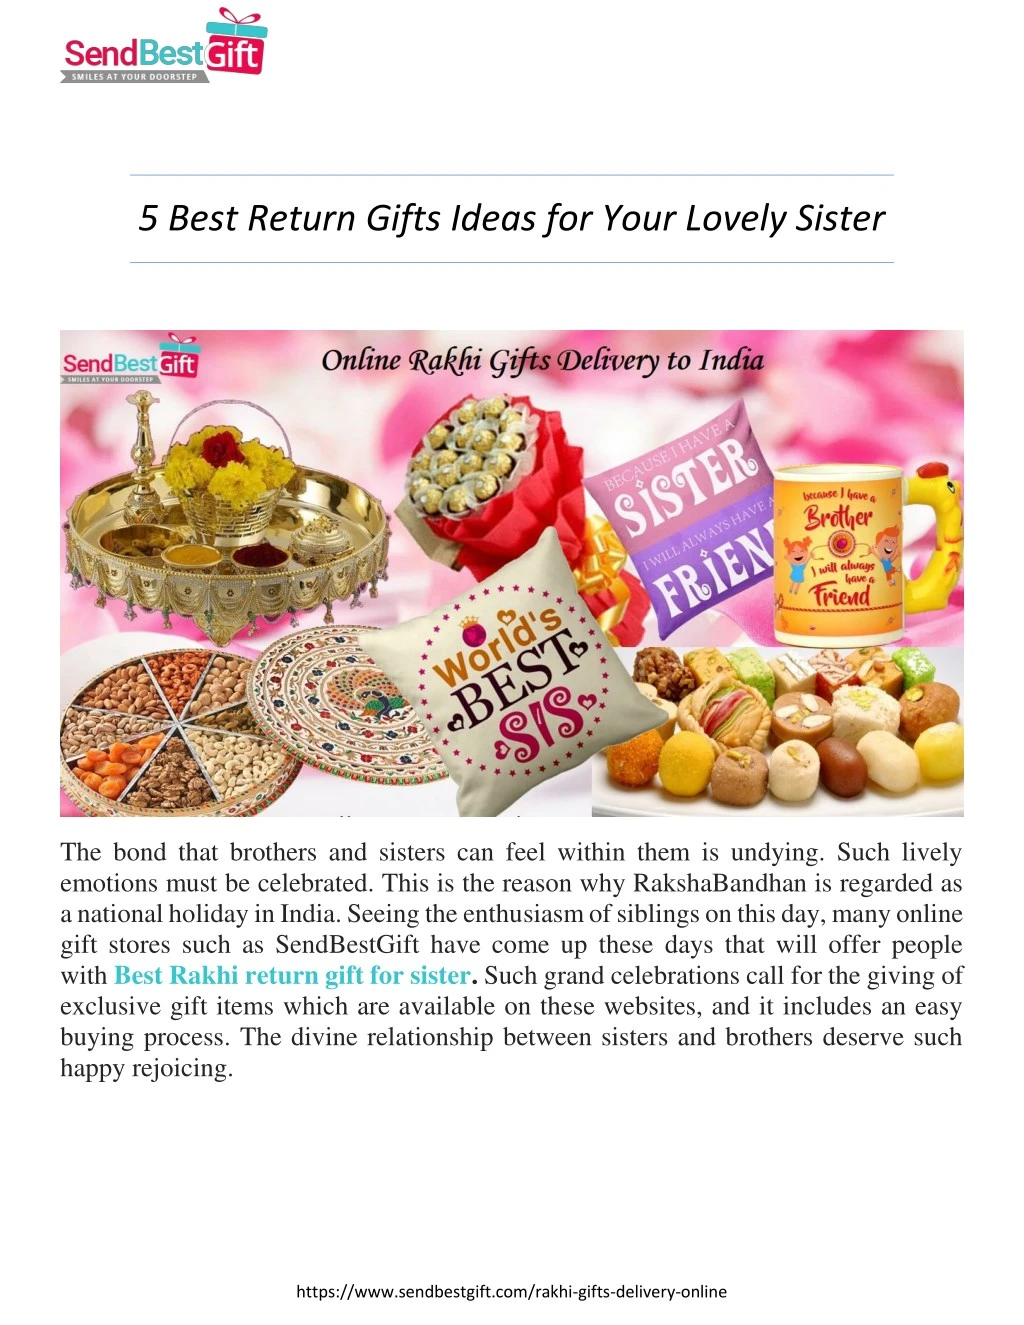 5 best return gifts ideas for your lovely sister